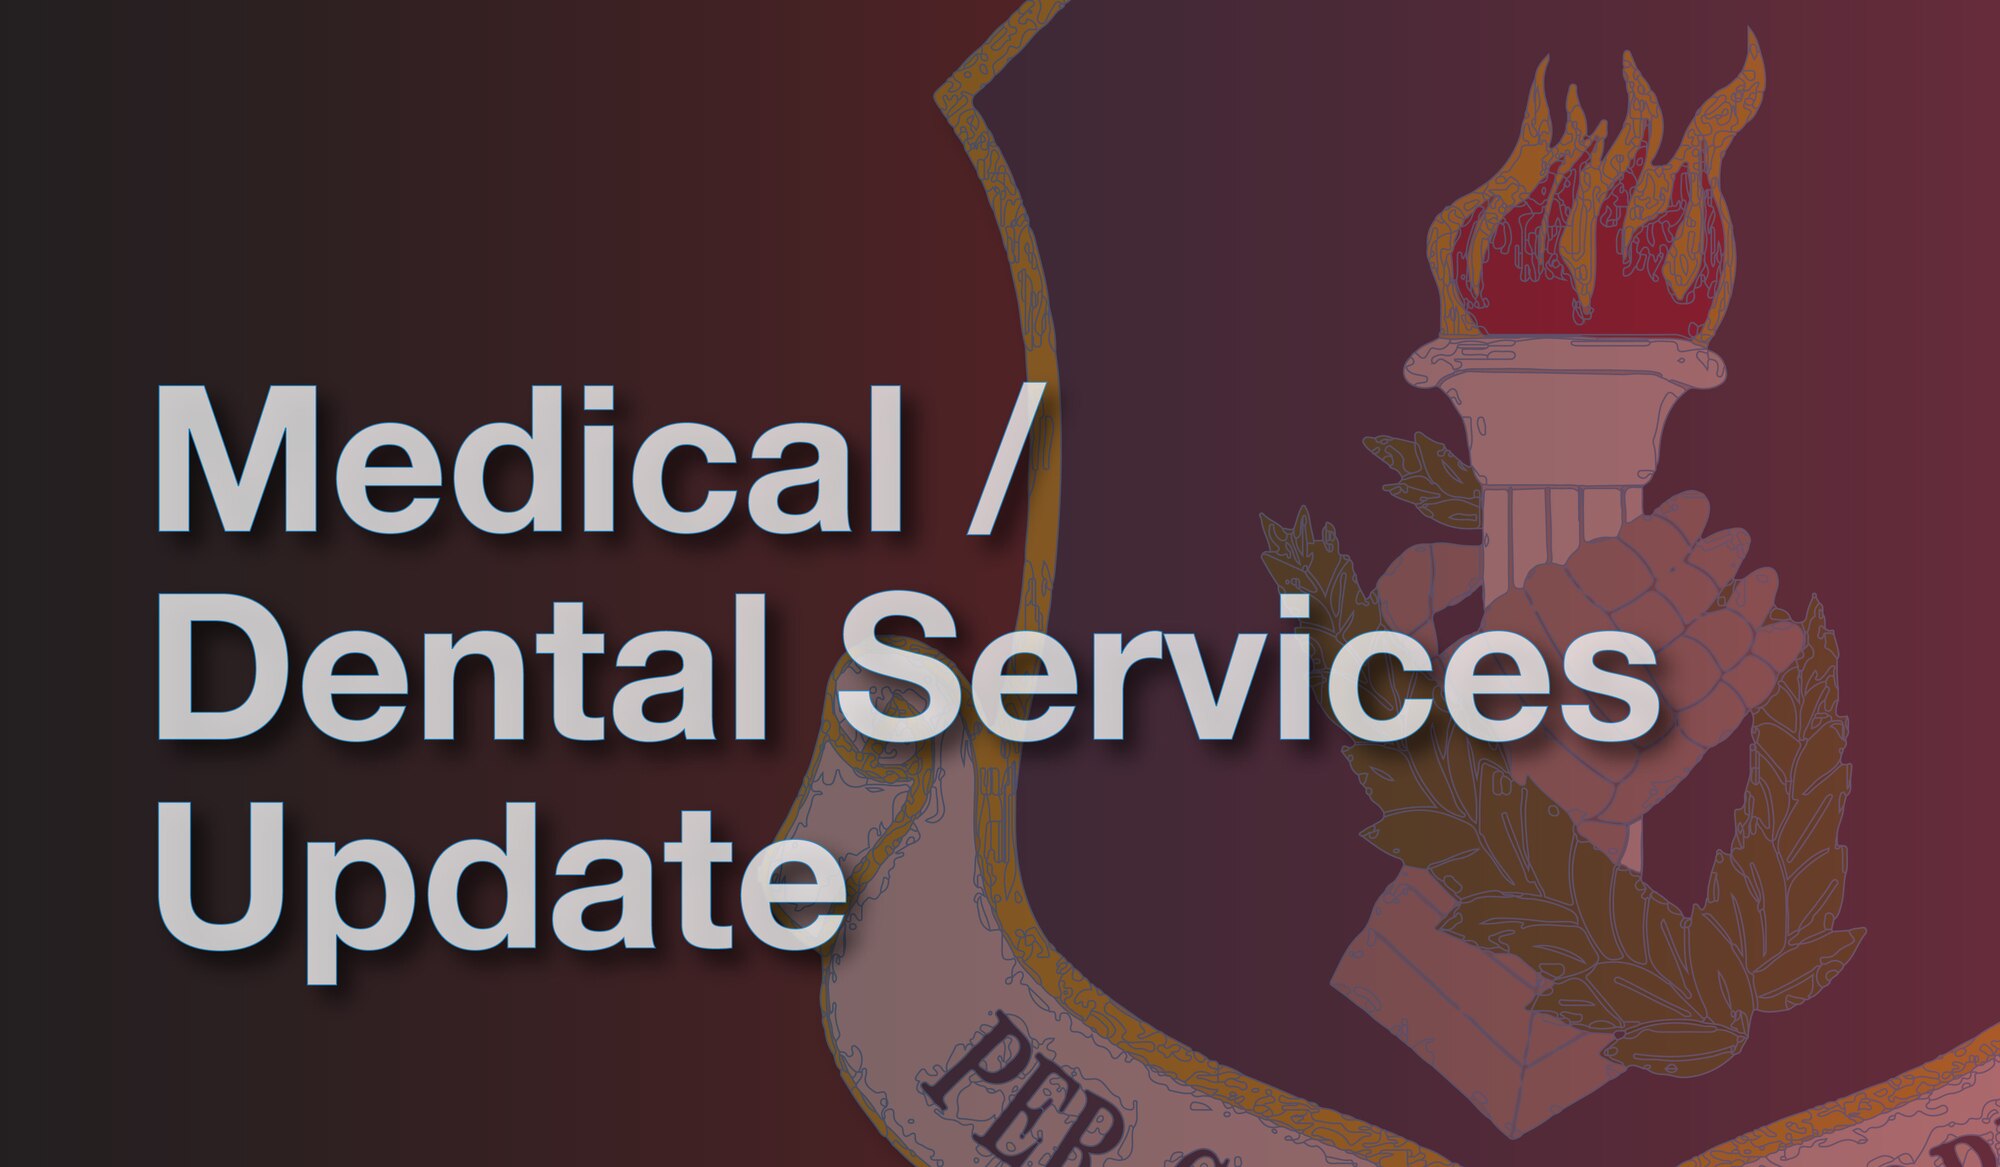 Medical and dental services offered during the August 2020 drill weekend.